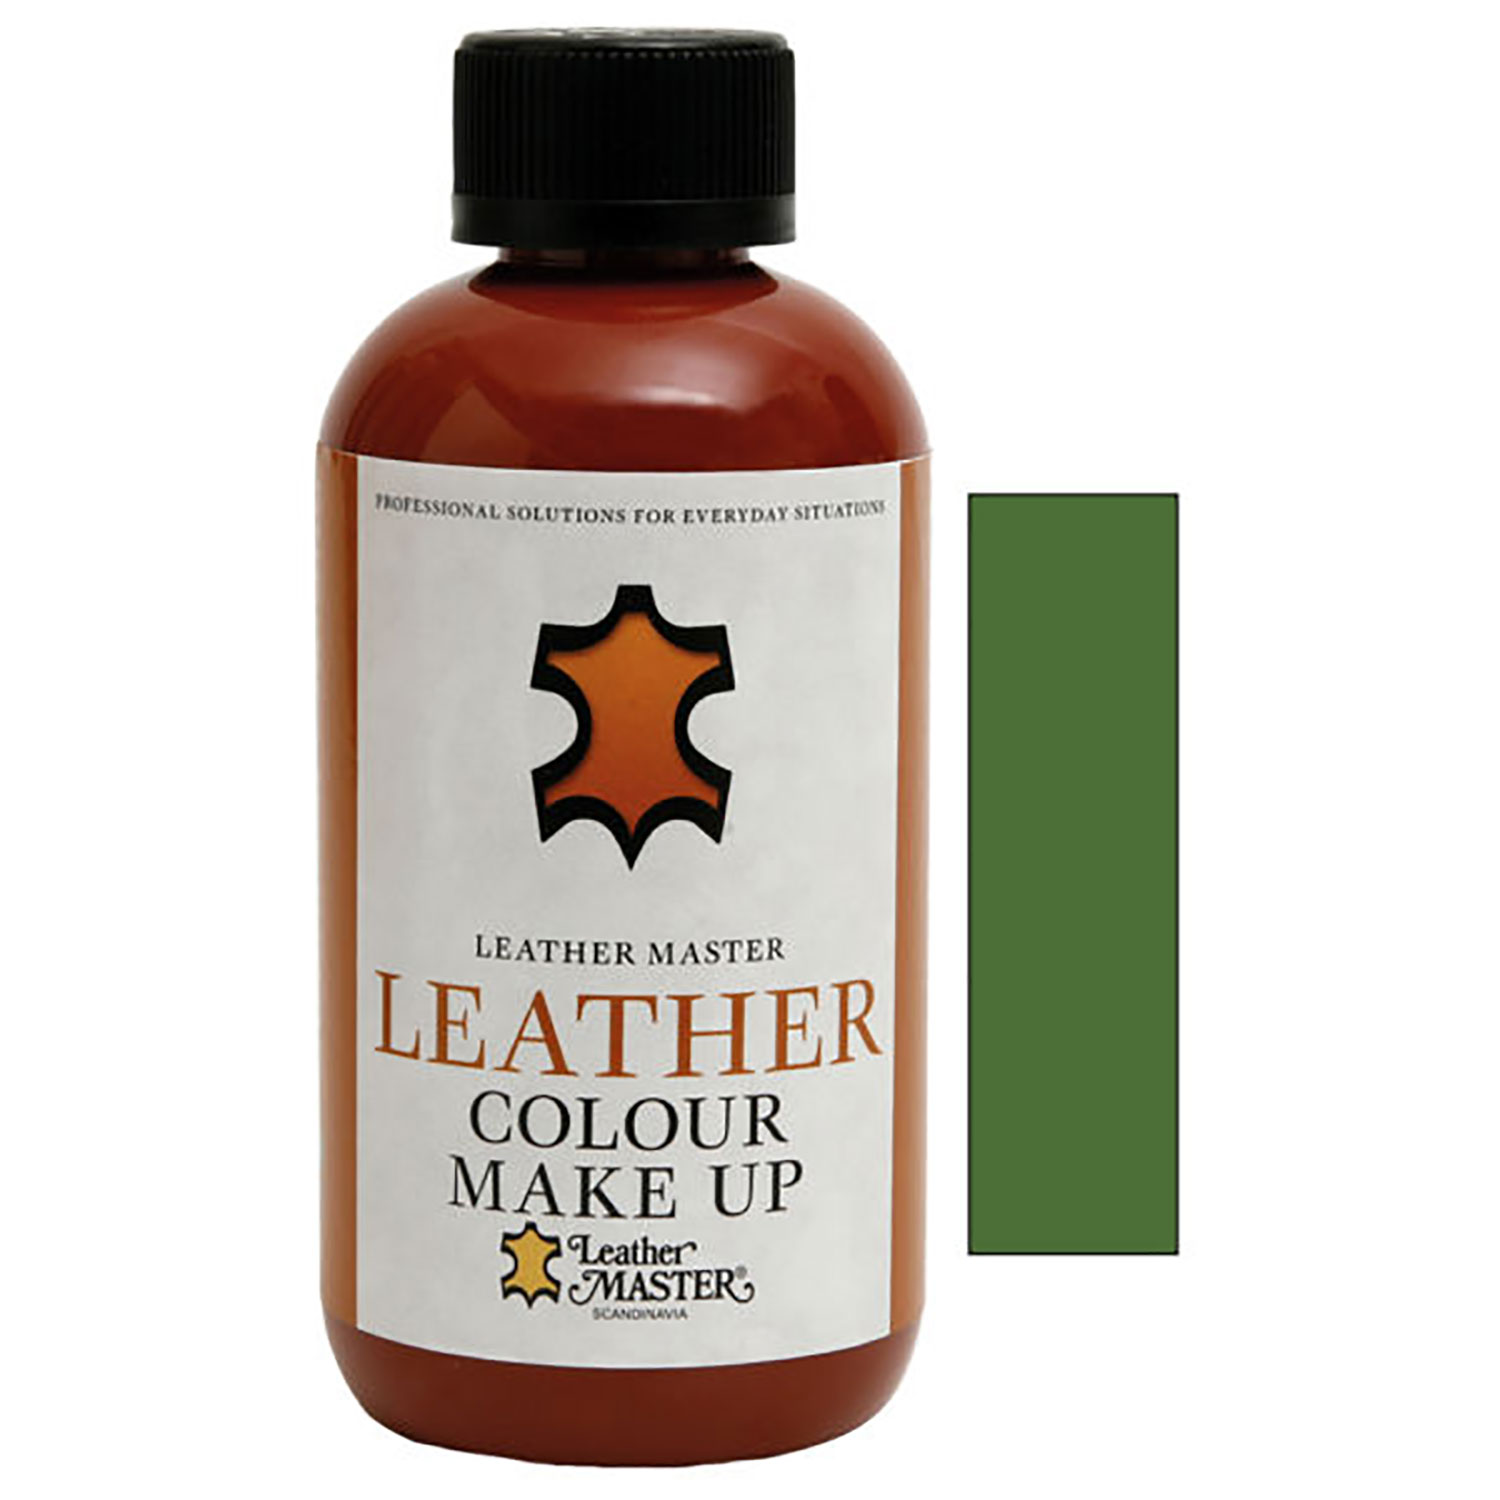 Leather Master Colour make up – olive green 150 ml